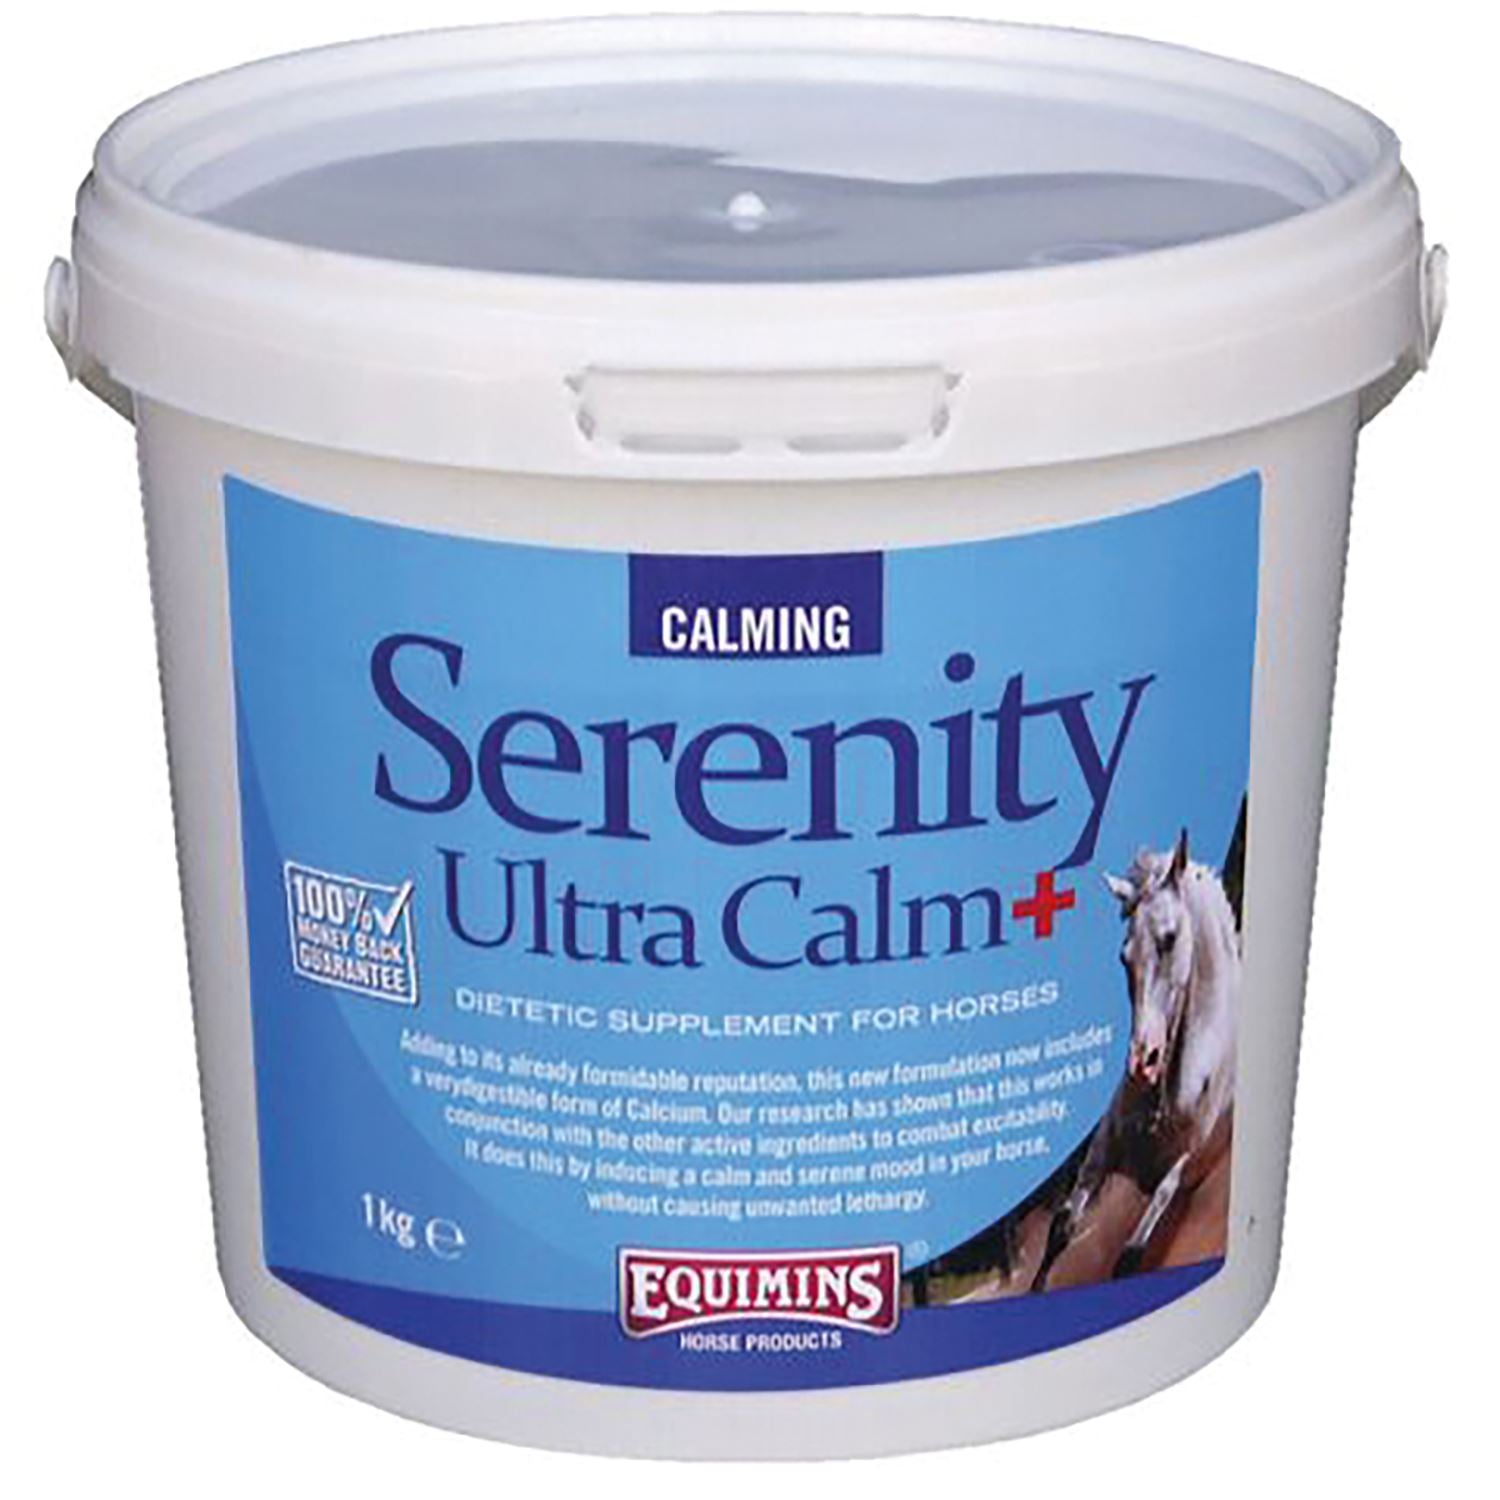 EQUIMINS SERENITY ULTRA CALM+ for Horse's Anxiety and Restlessness